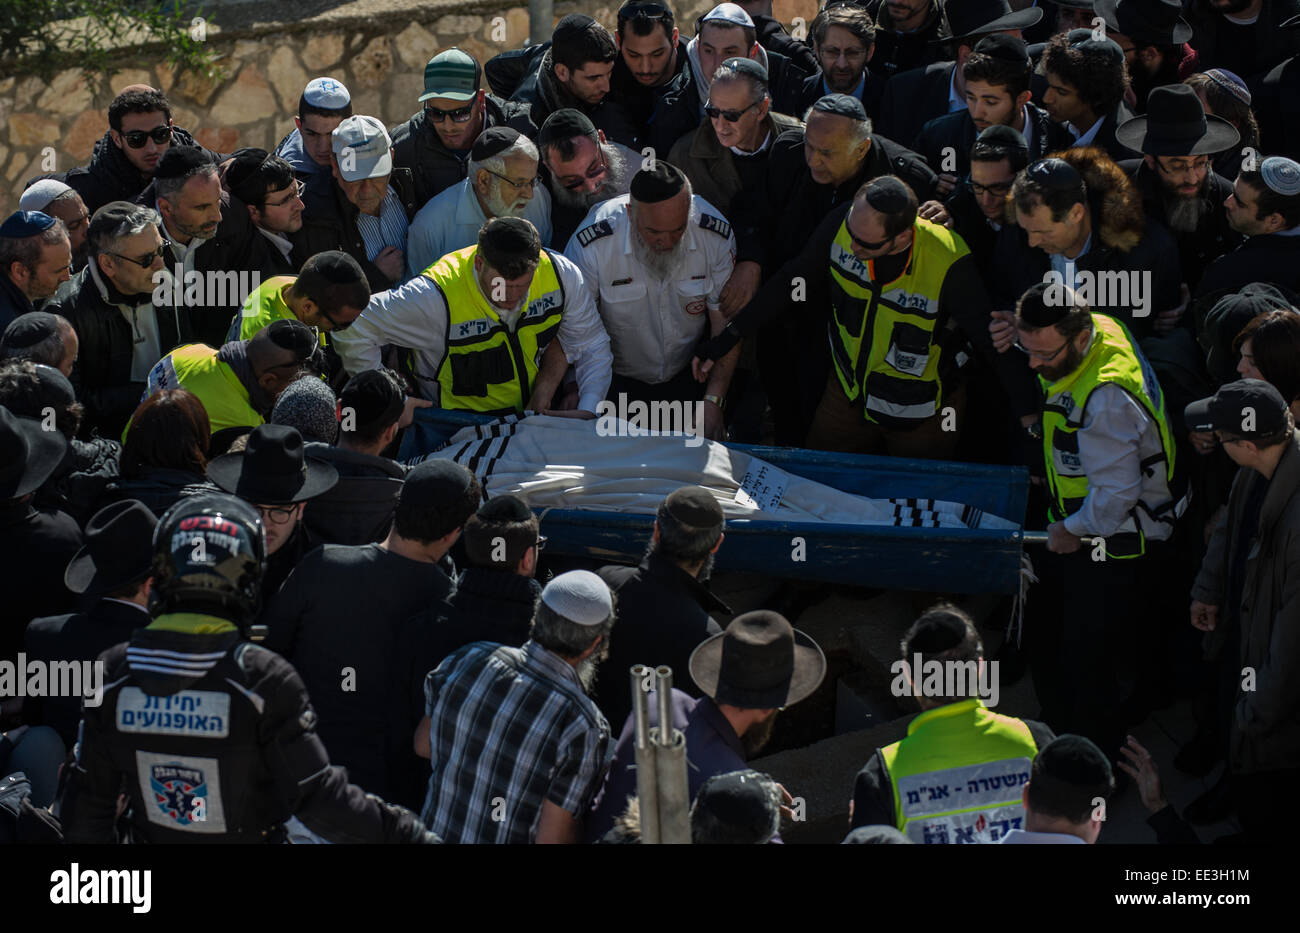 Jeruslaem, Israel. 13th Jan, 2015. A body of victim of Paris supermarket attack is carried to the grave during a funeral ceremony at Givat Shaul cemetery, on the outskirts of Jerusalem, on Jan. 13, 2015. Israeli leaders and multitude of mourners gathered Tuesday with the families of four Jewish victims of last week's terror attack on a Paris kosher supermarket for a solemn funeral ceremony at a Jerusalem cemetery. Yoav Hattab, Yohan Cohen, Philippe Braham and Francois-Michel Saada, were gunned down on Friday during a hostage attack in Paris.market in eastern Paris. Credit:  Xinhua/Alamy Live N Stock Photo